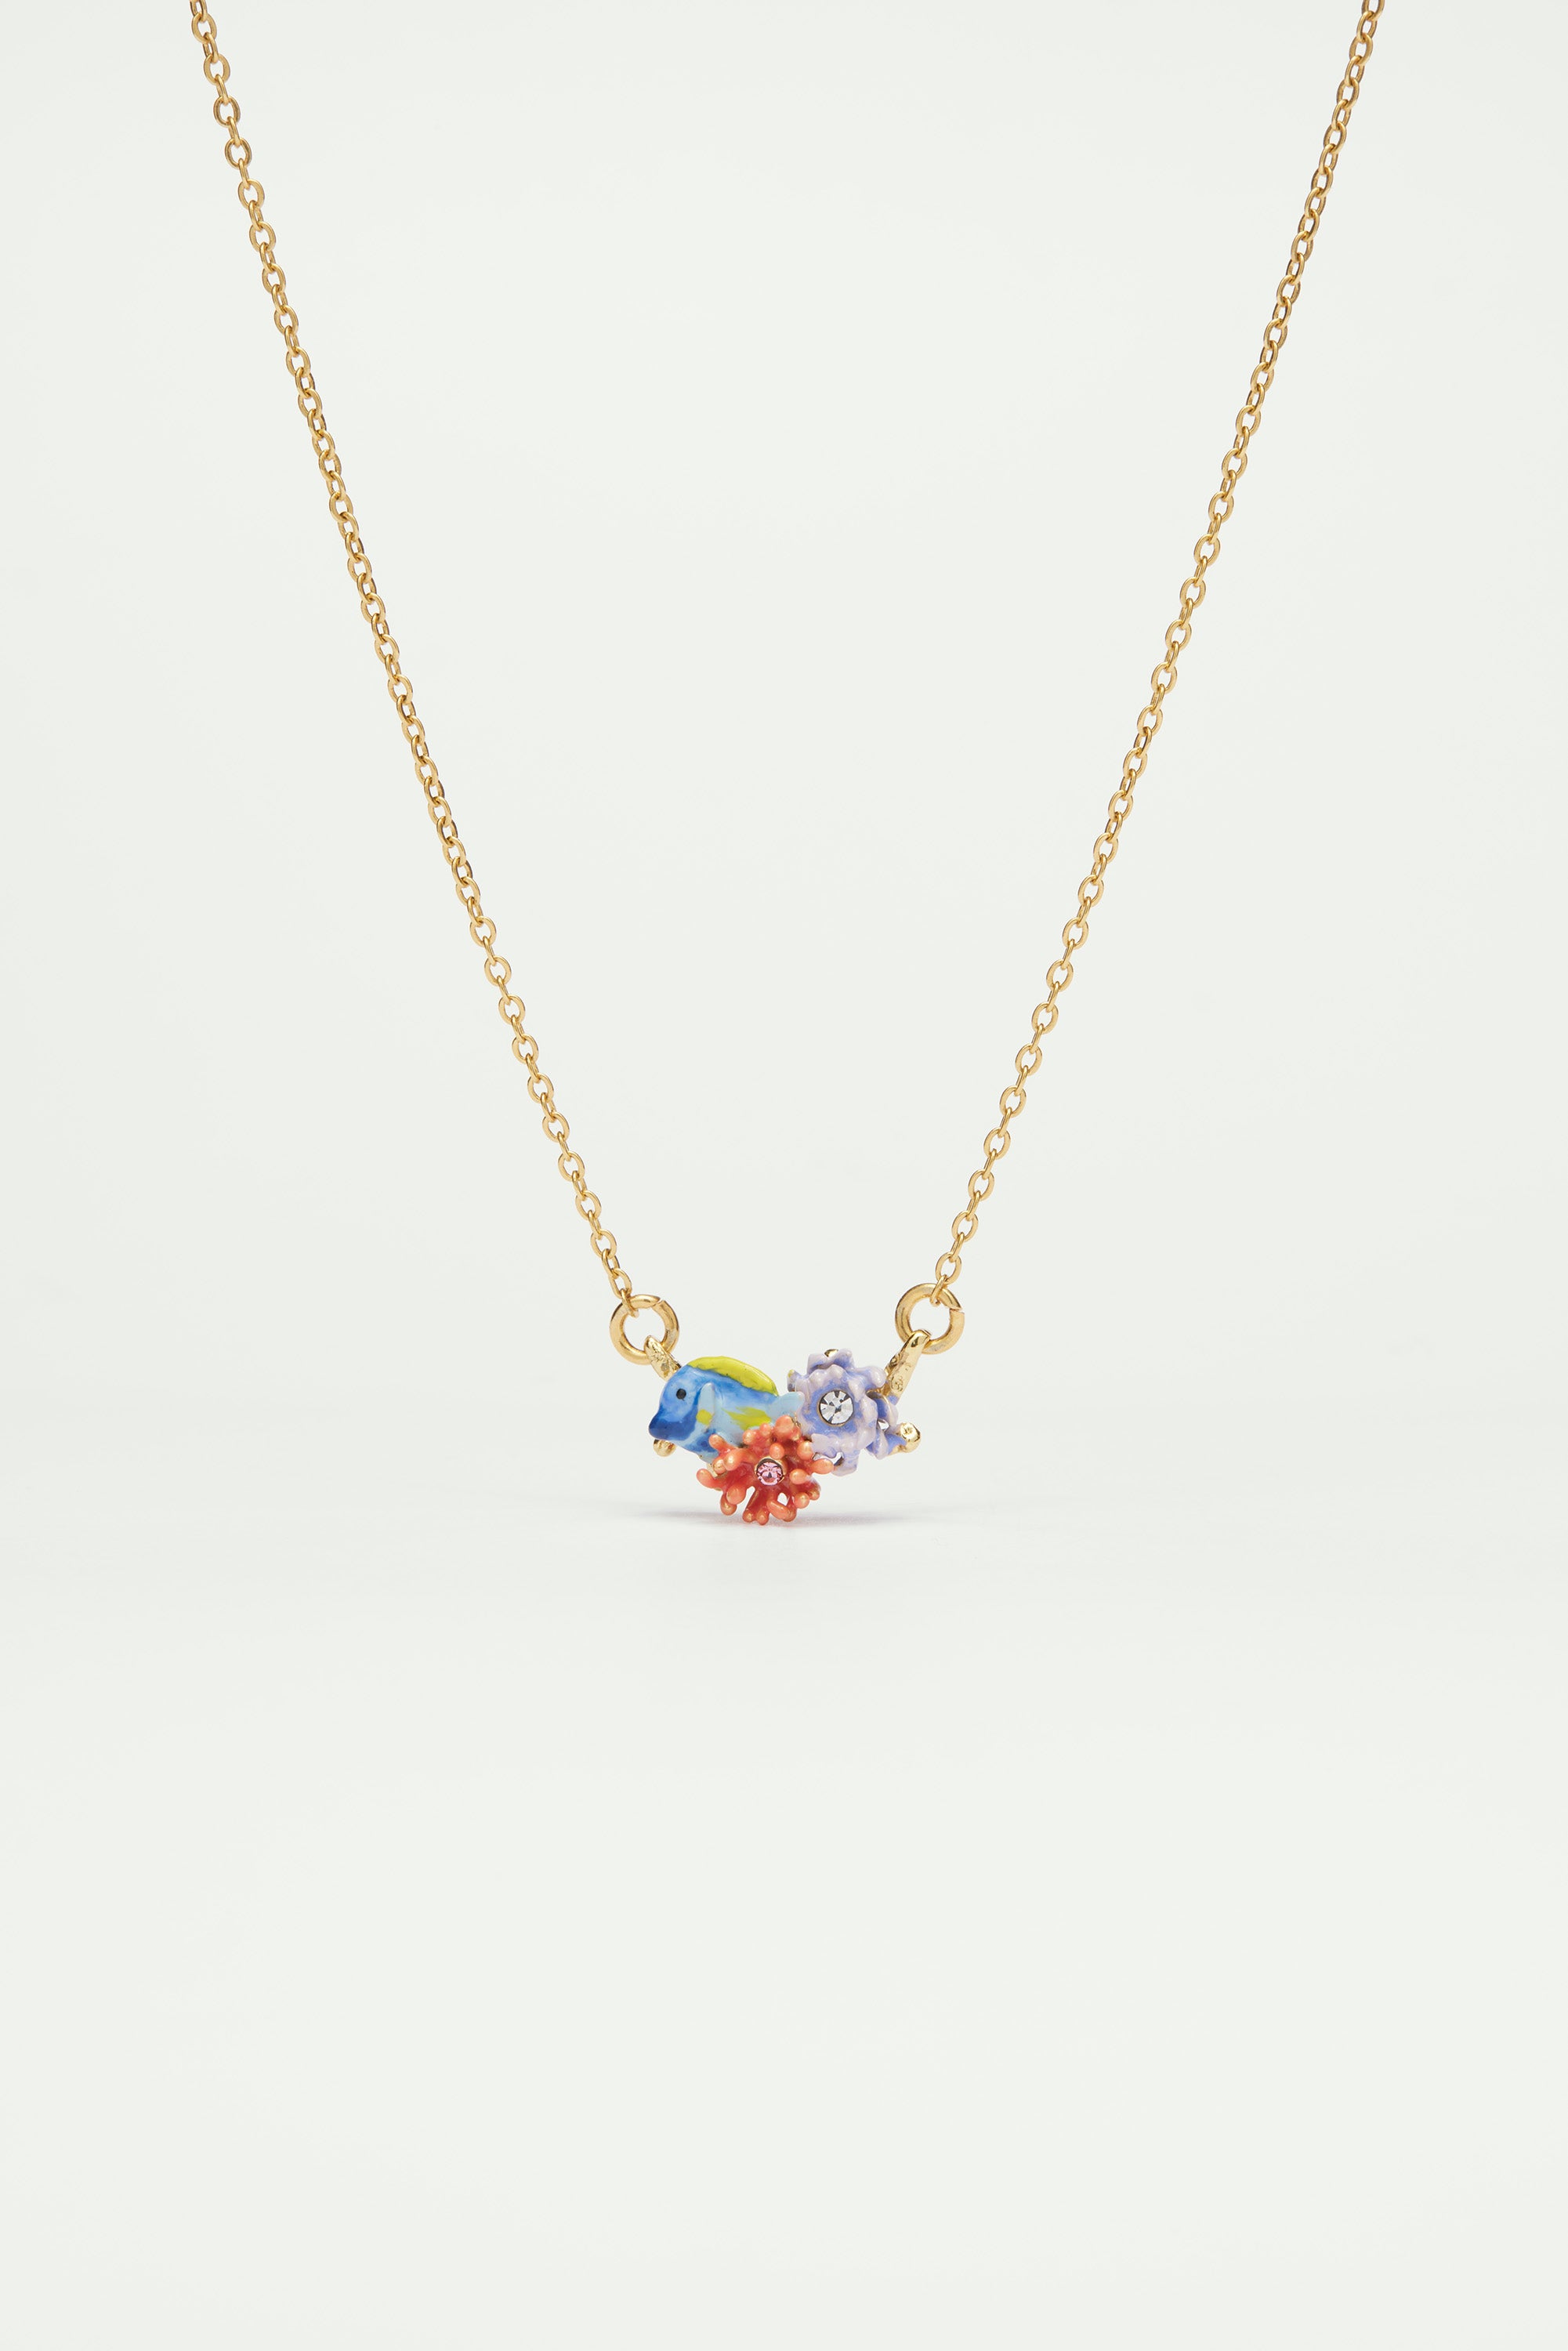 Blue fish and pink anemone pendant necklace